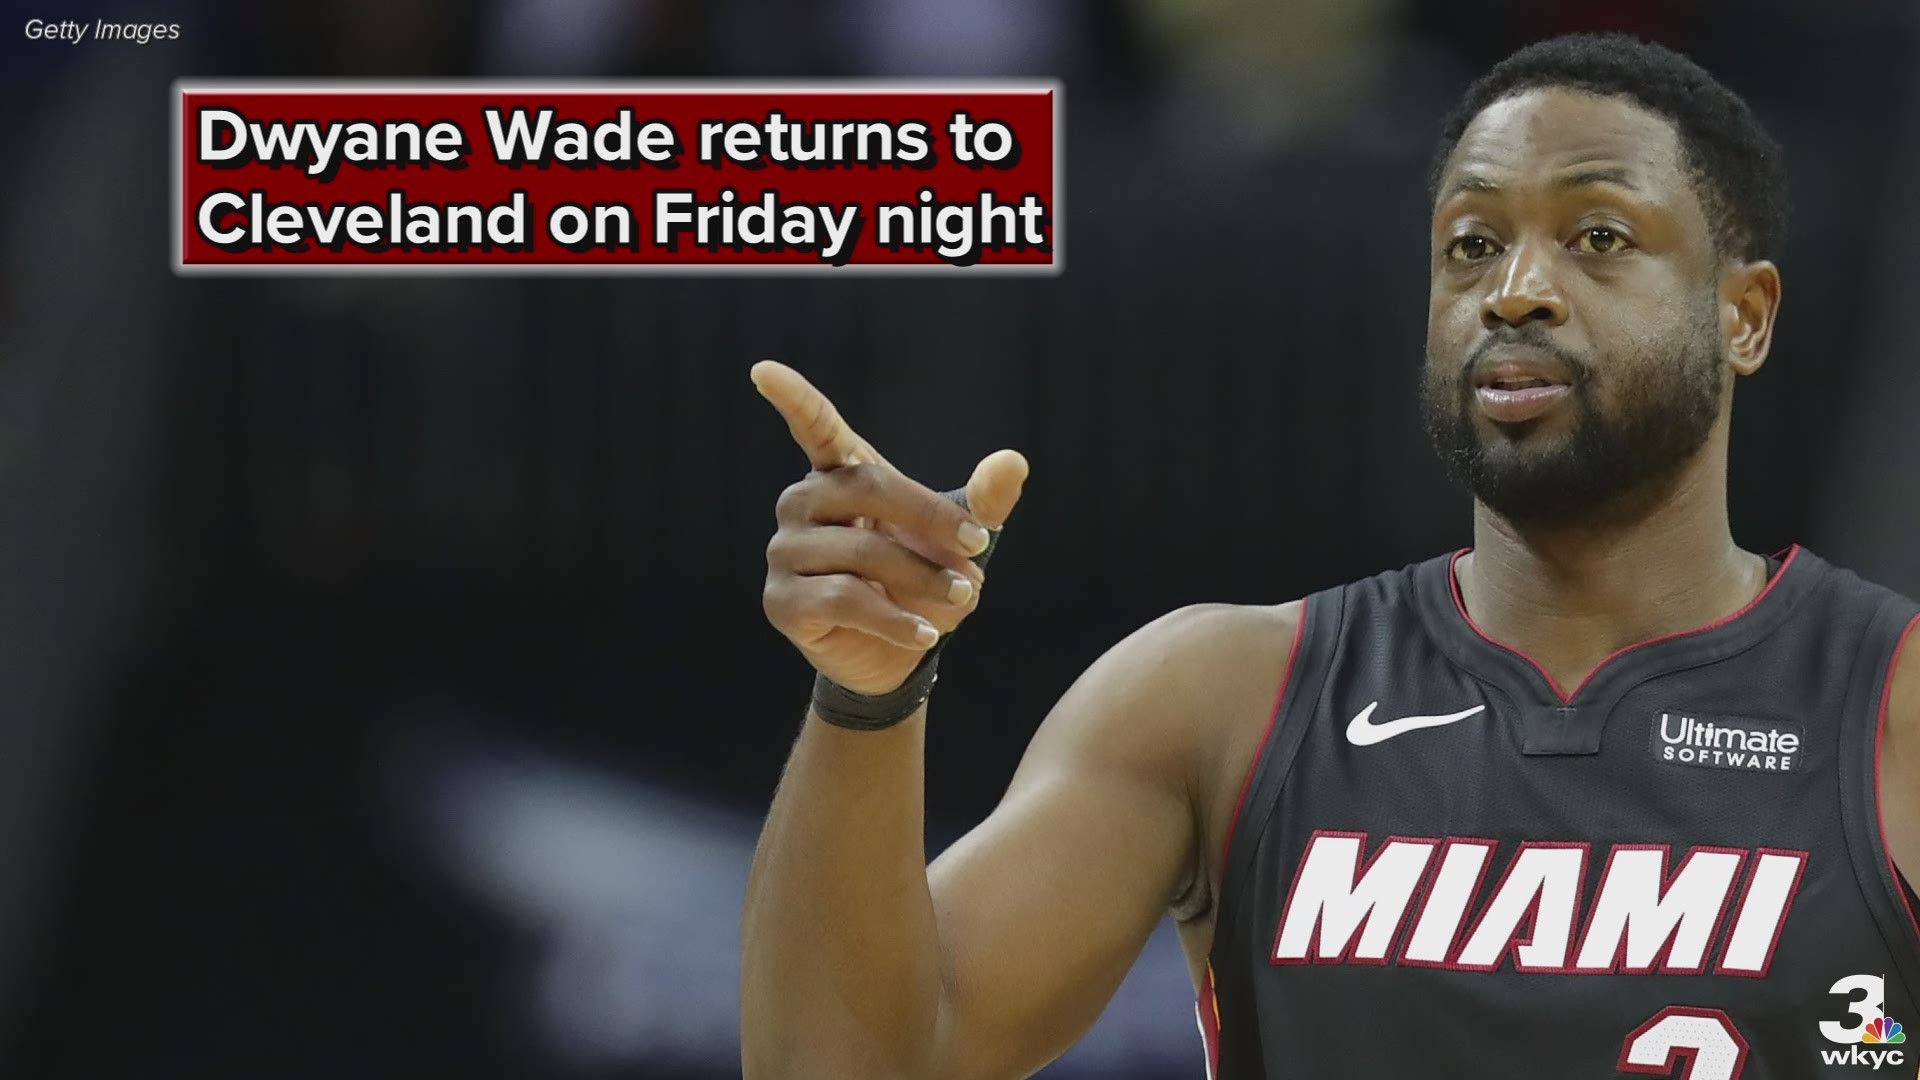 On Friday night, Dwyane Wade will play the final game of his career at Quicken Loans Arena.